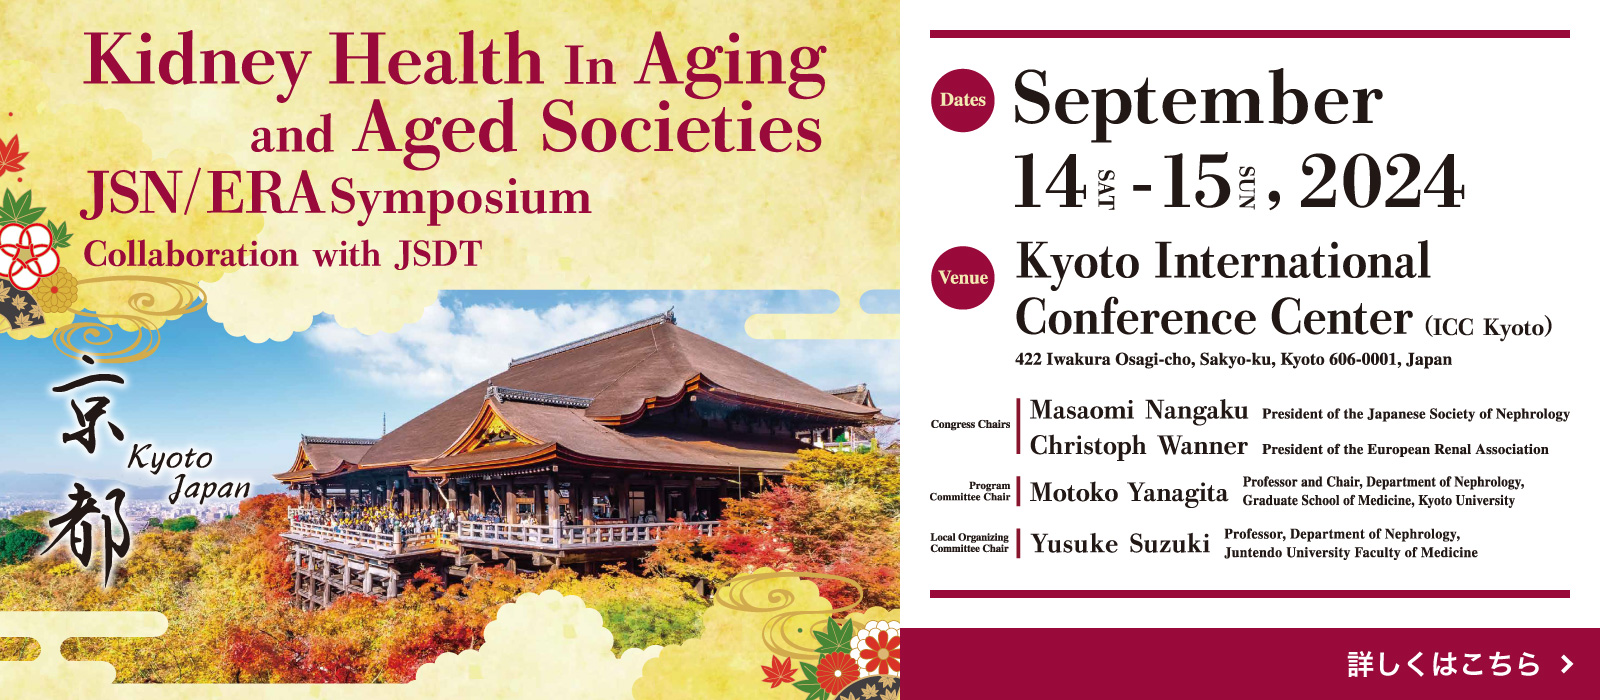 Kidney Health in Aging and Aged Societies: JSN/ERA symposium collaboration with JSDT & WDA